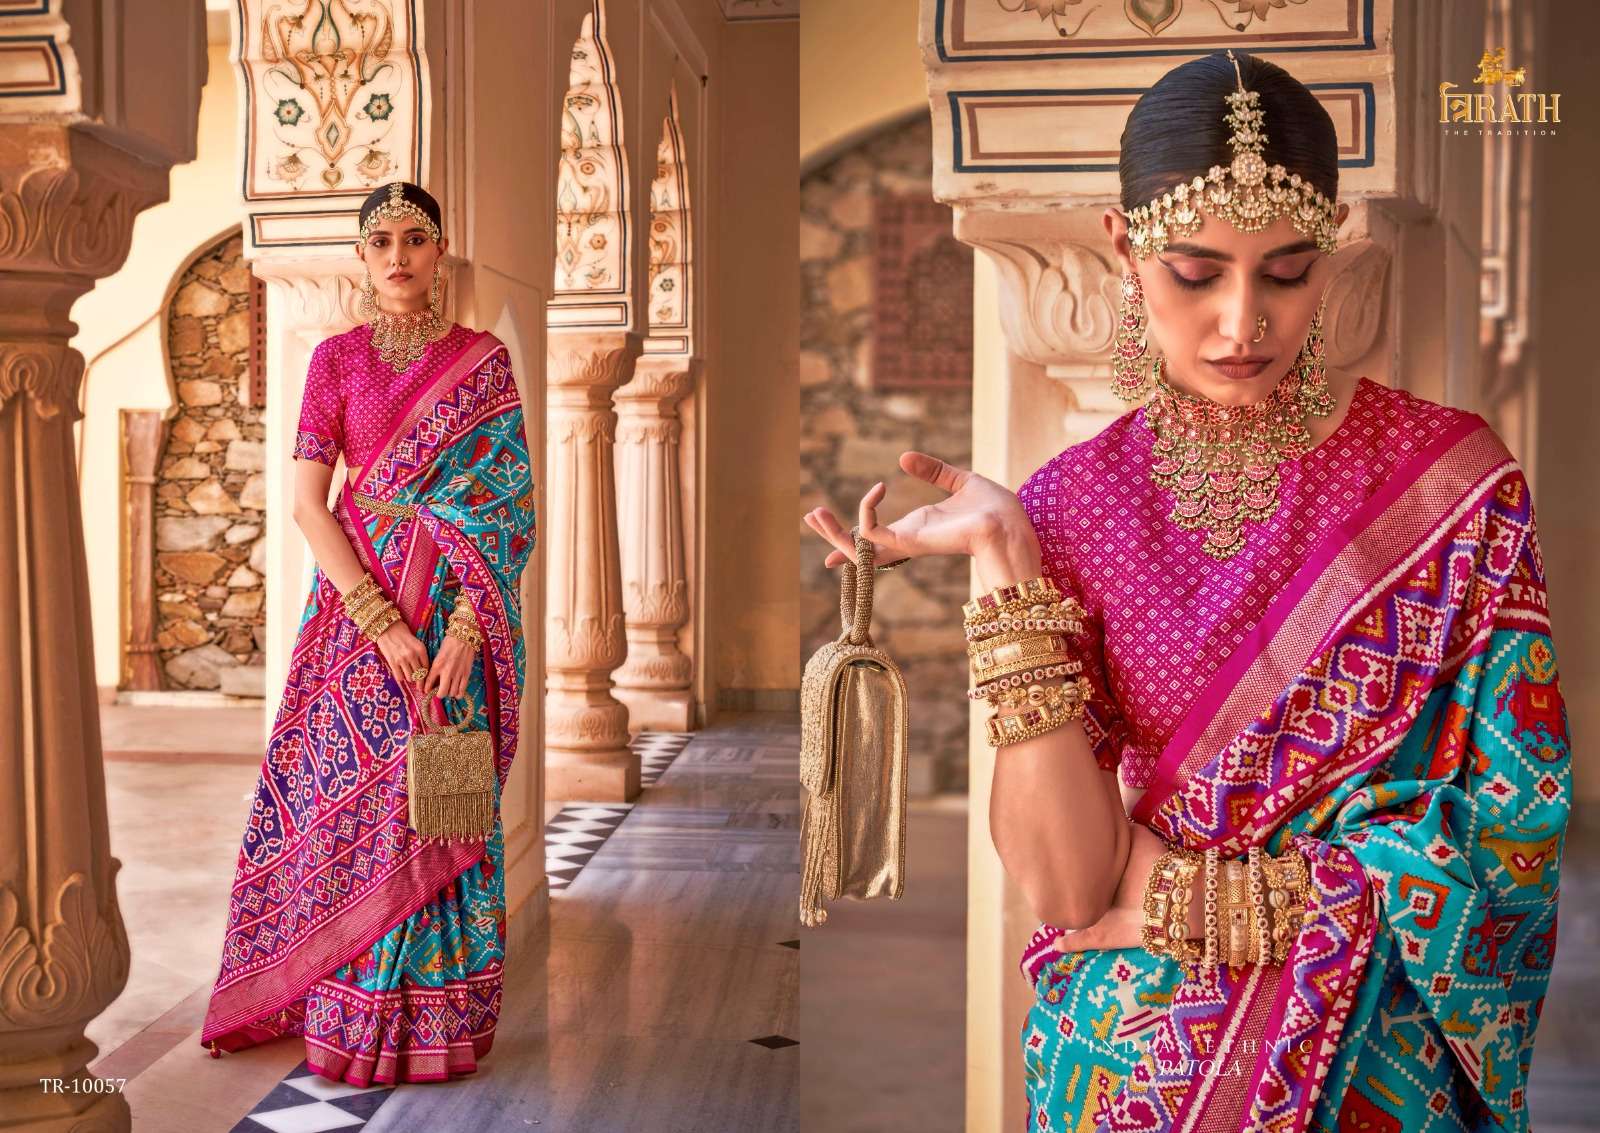 Pavitra Patola By Trirath 10055 To 10066 Series Indian Traditional Wear Collection Beautiful Stylish Fancy Colorful Party Wear & Occasional Wear Soft Silk Sarees At Wholesale Price